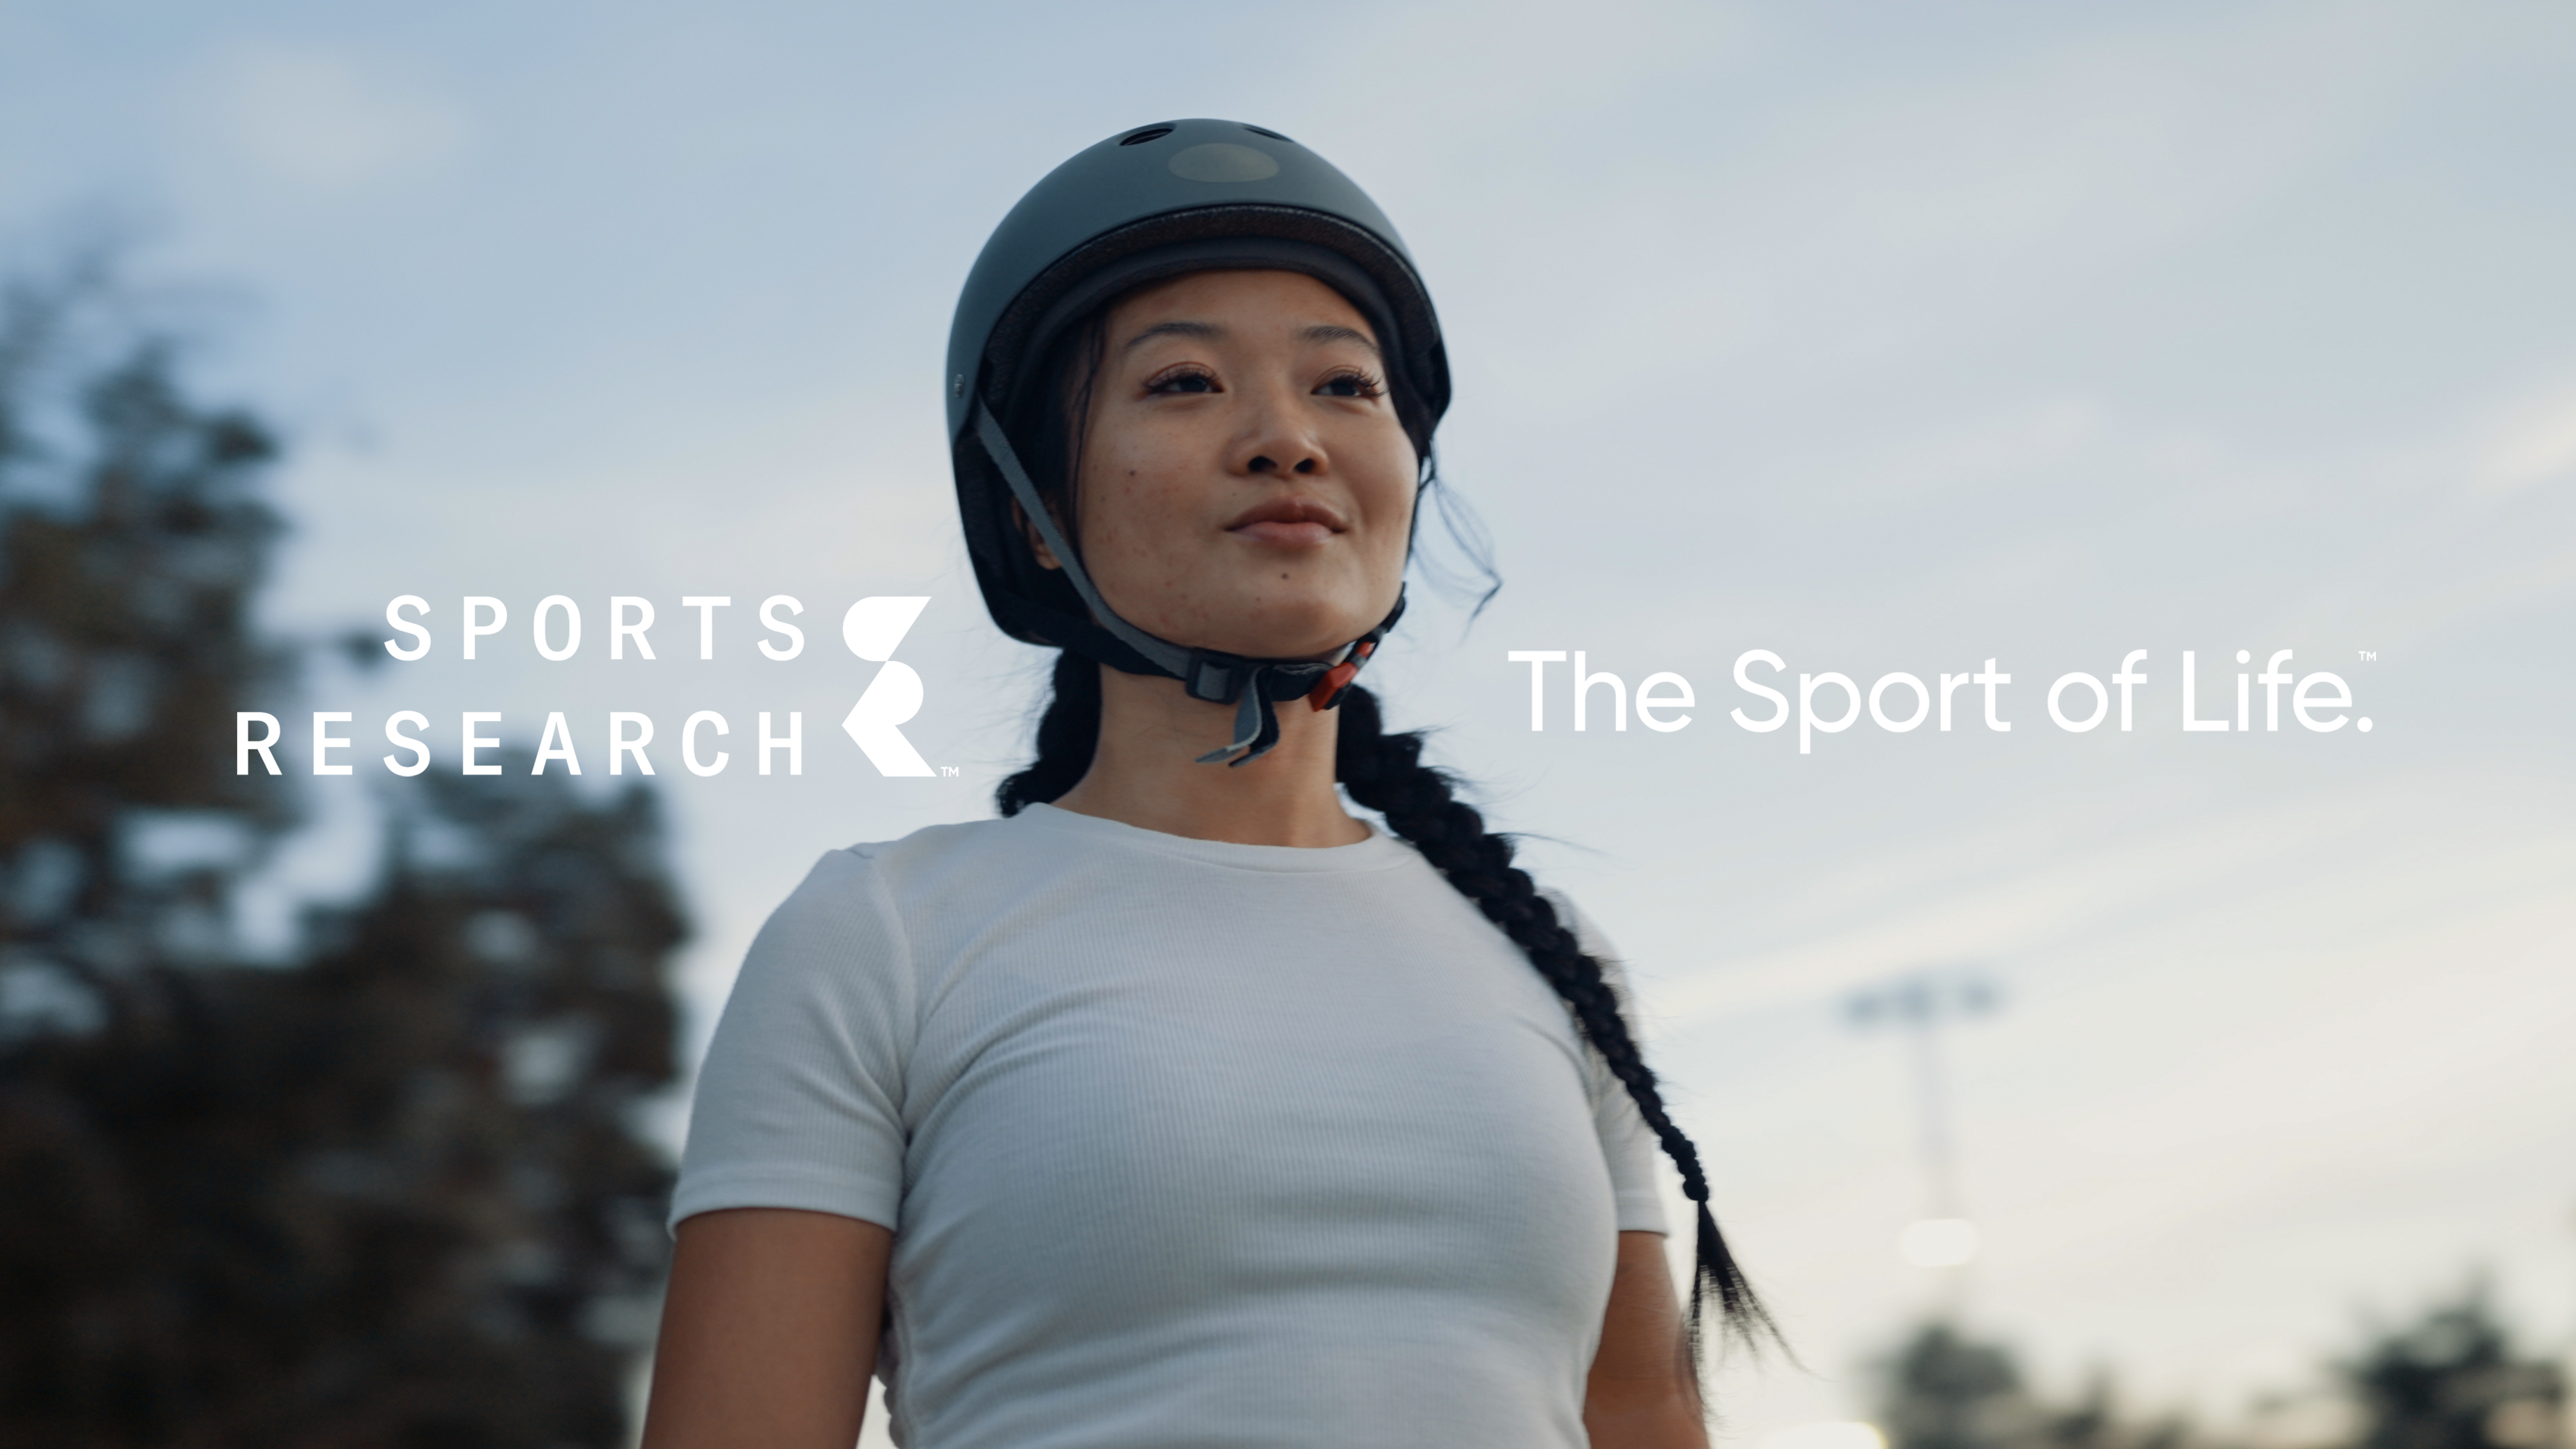 Sports Research Launches Inspirational “The Sport of Life